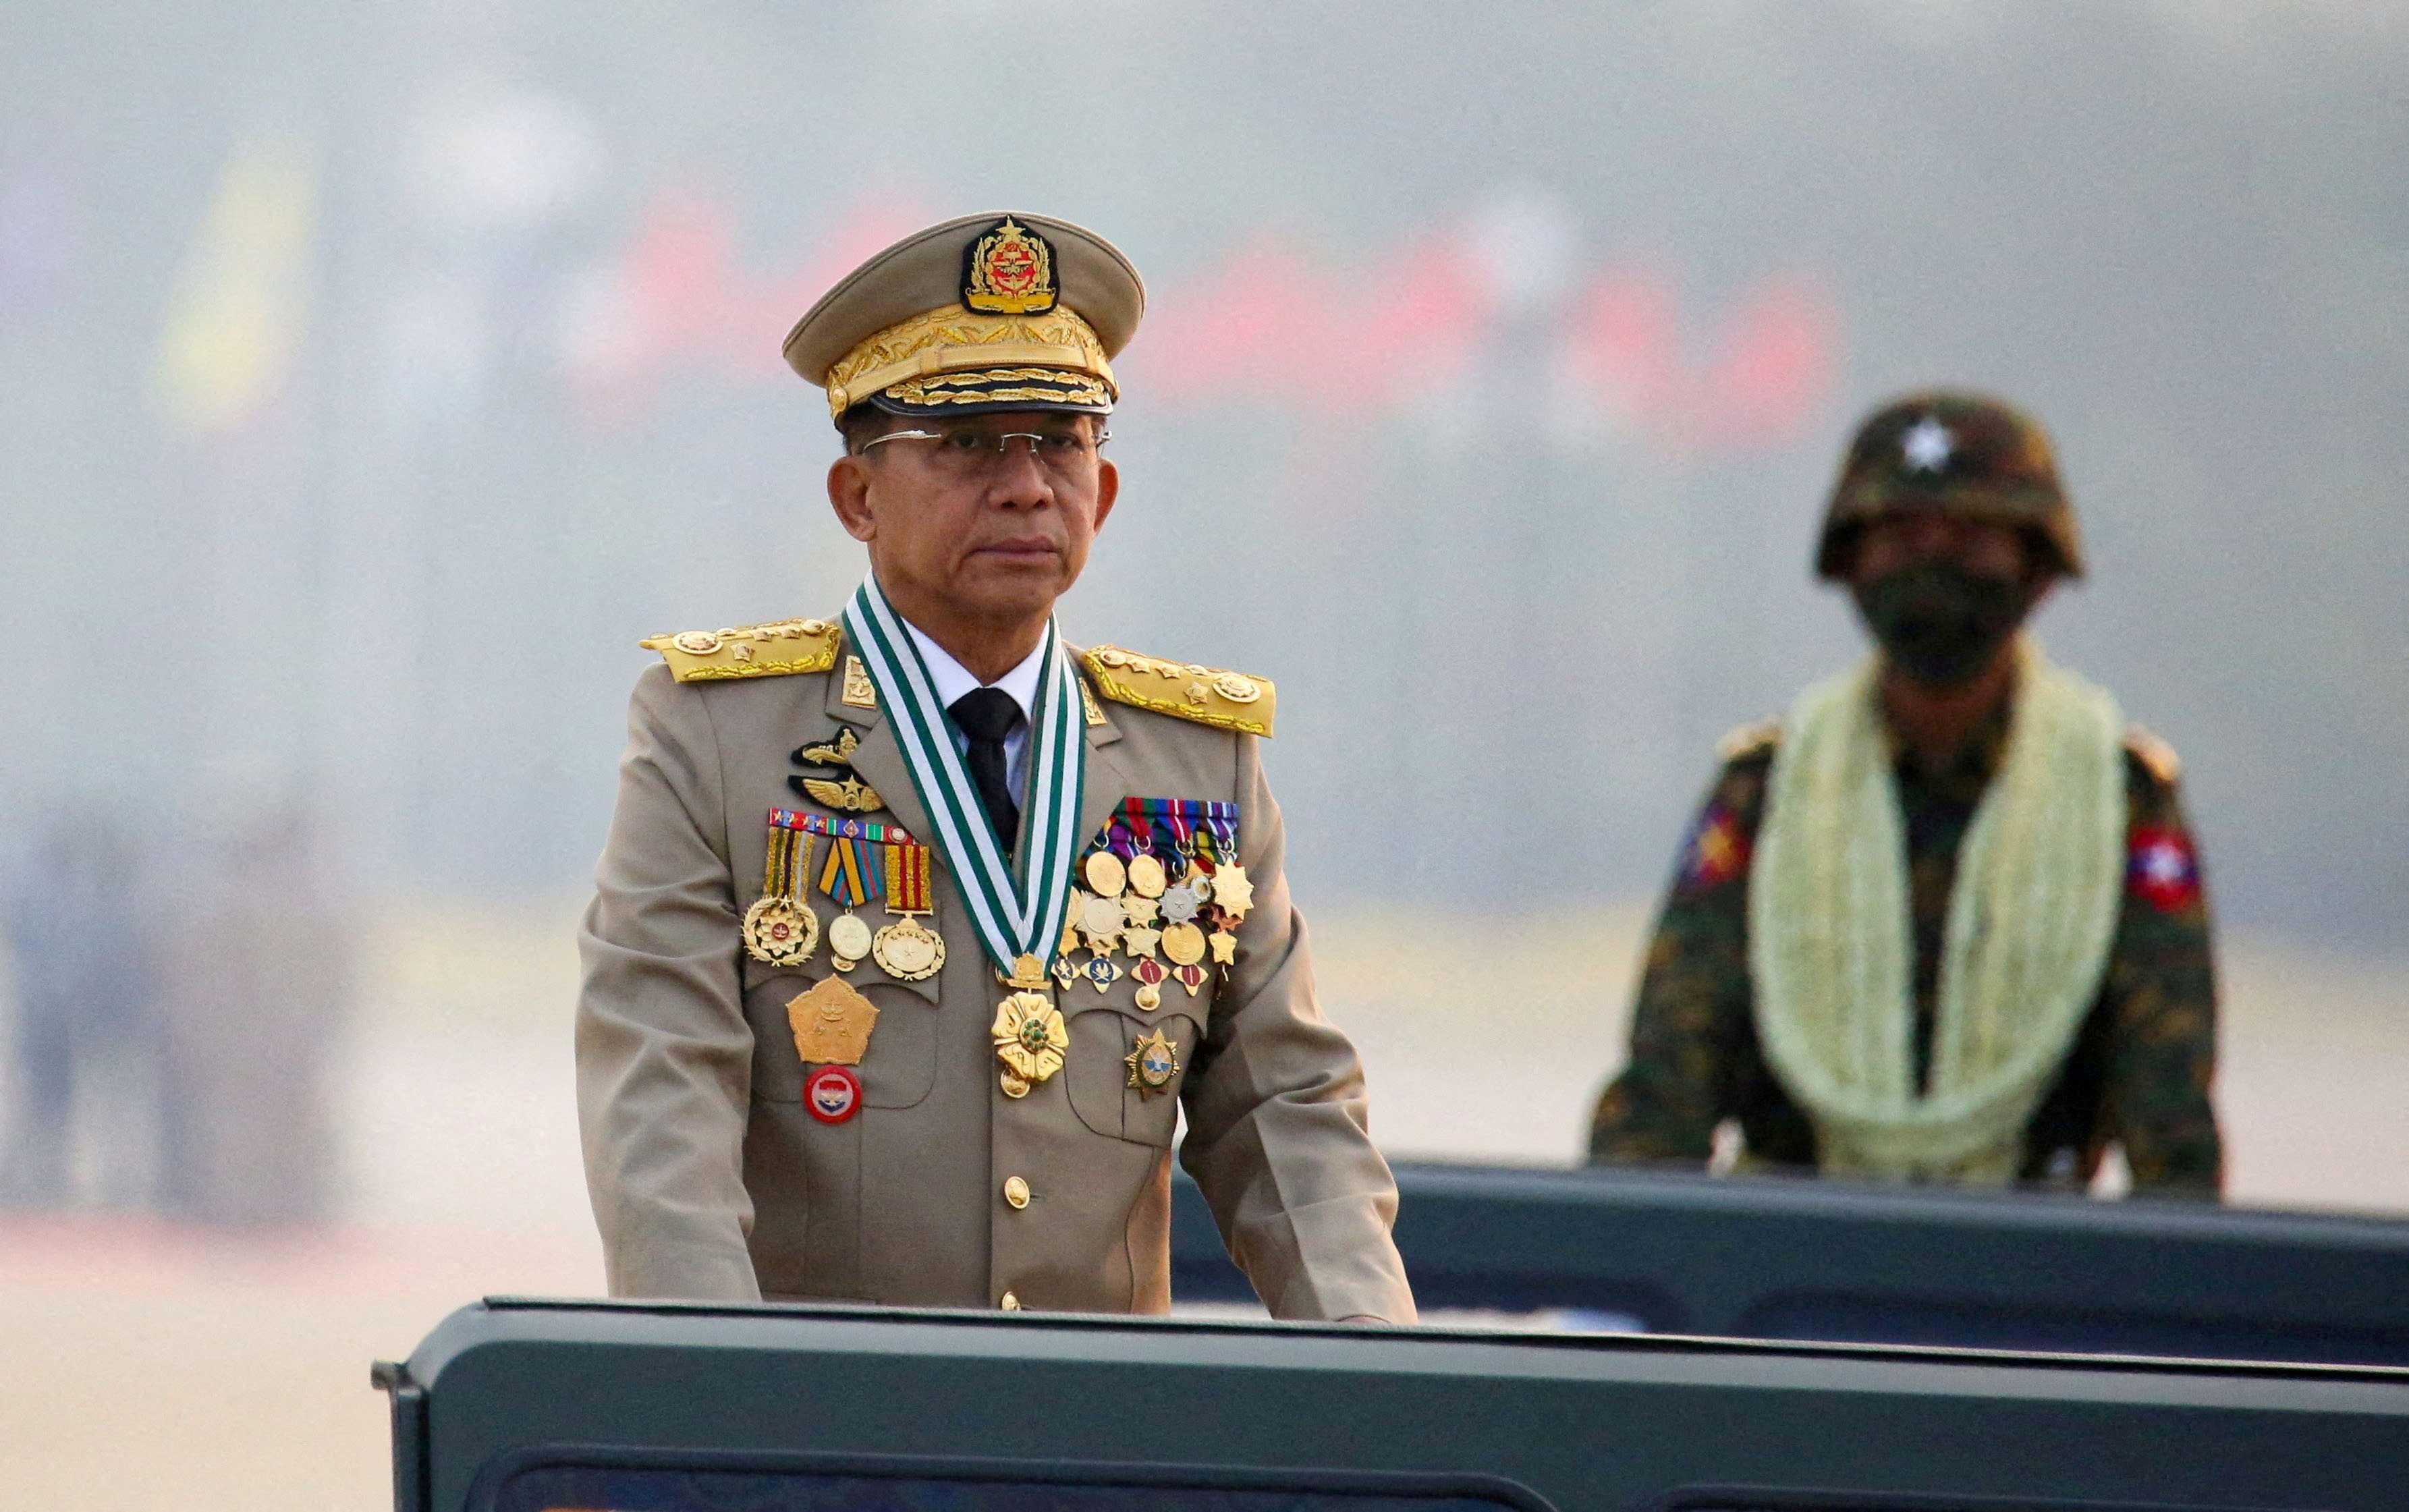 Myanmar's junta chief Senior General Min Aung Hlaing presides over an army parade on Armed Forces Day in Naypyitaw, Myanmar, March 27, 2021. Photo: Reuters